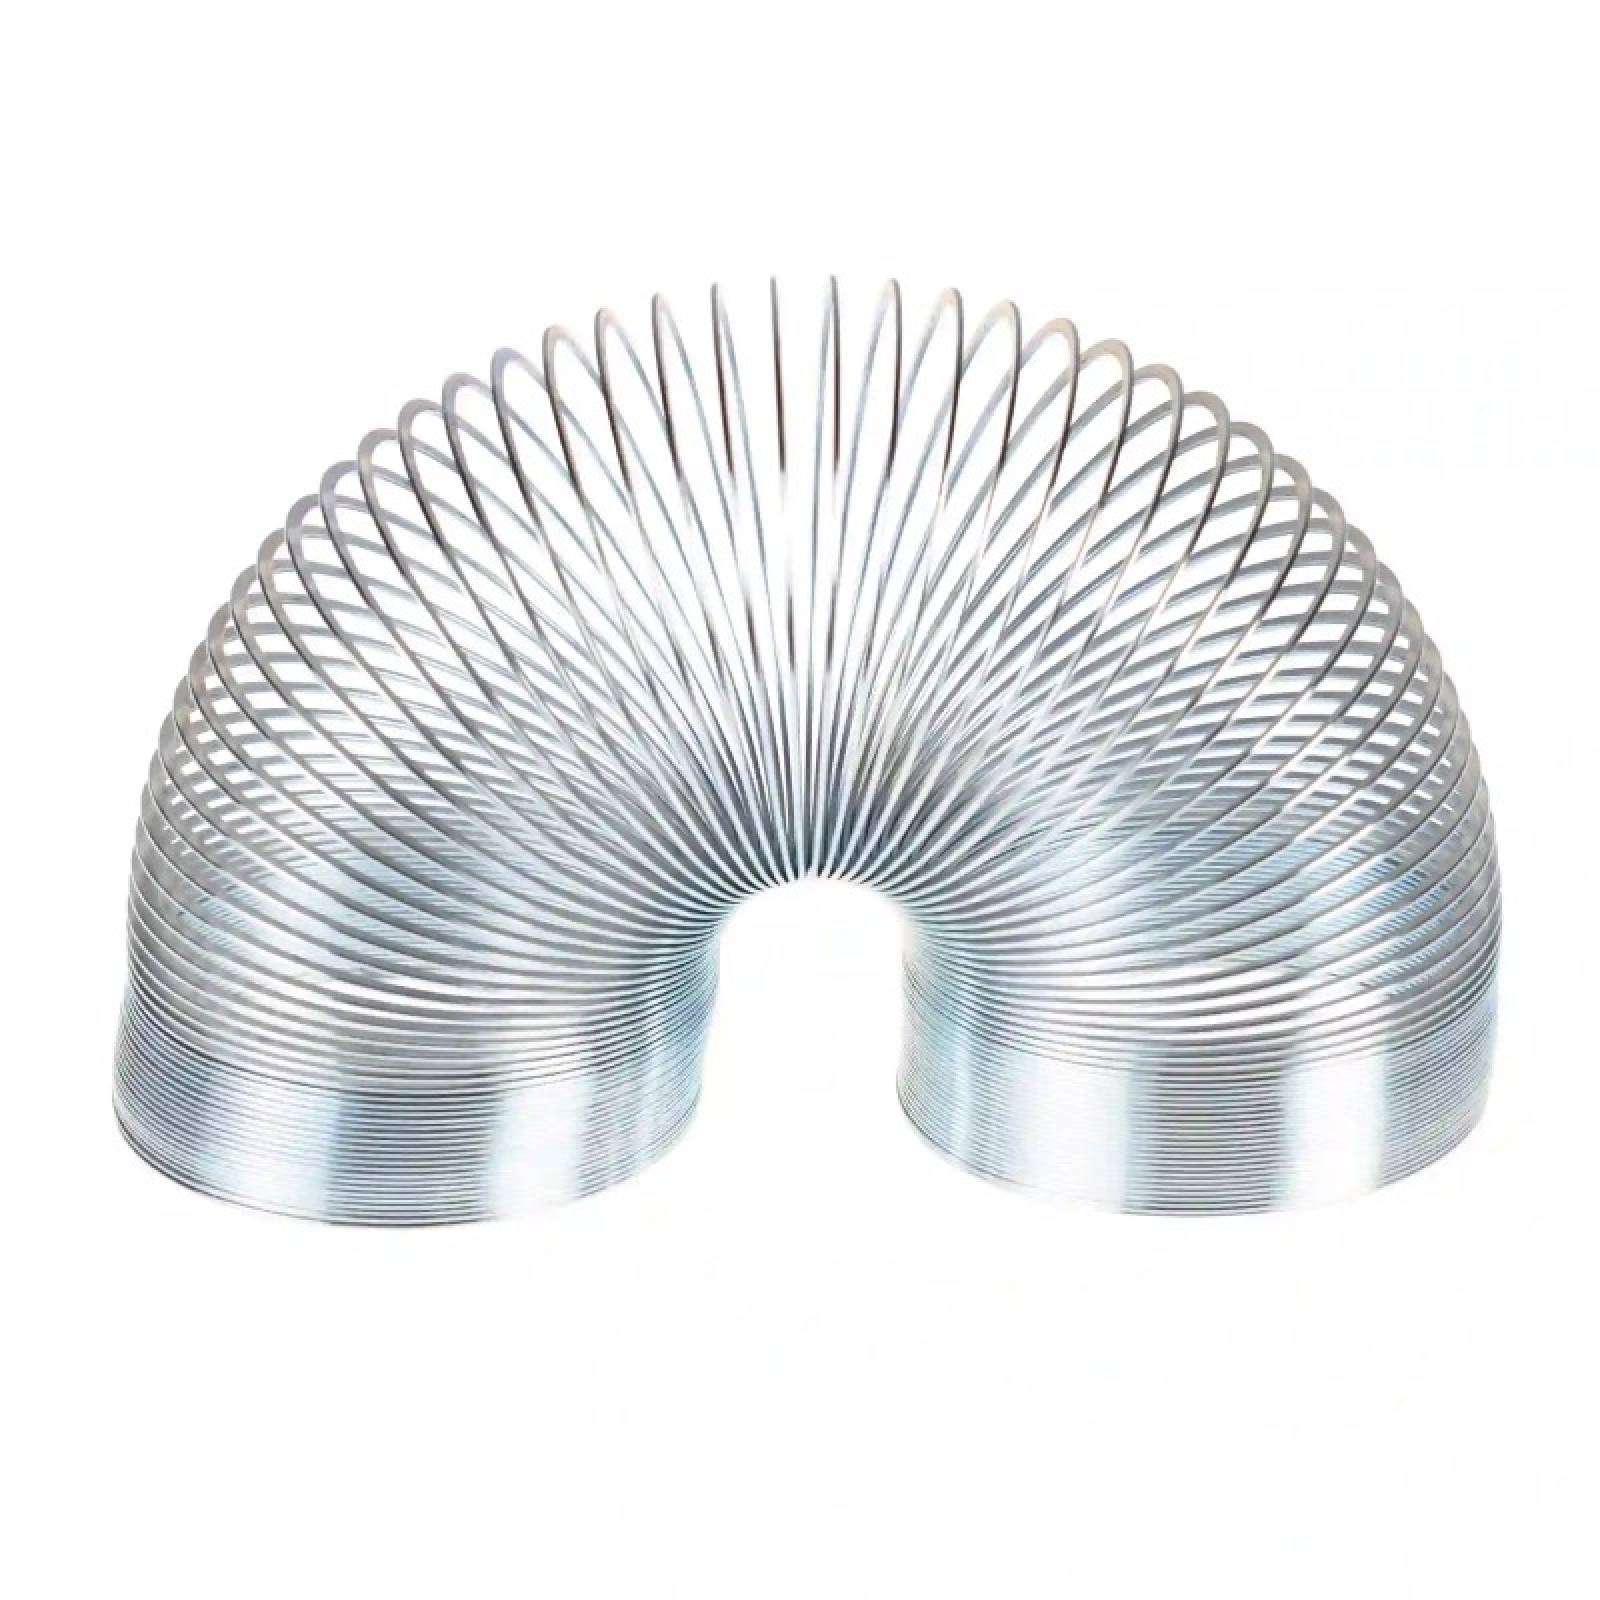 Slinky Metal Springy Toy 6+ thumbnails